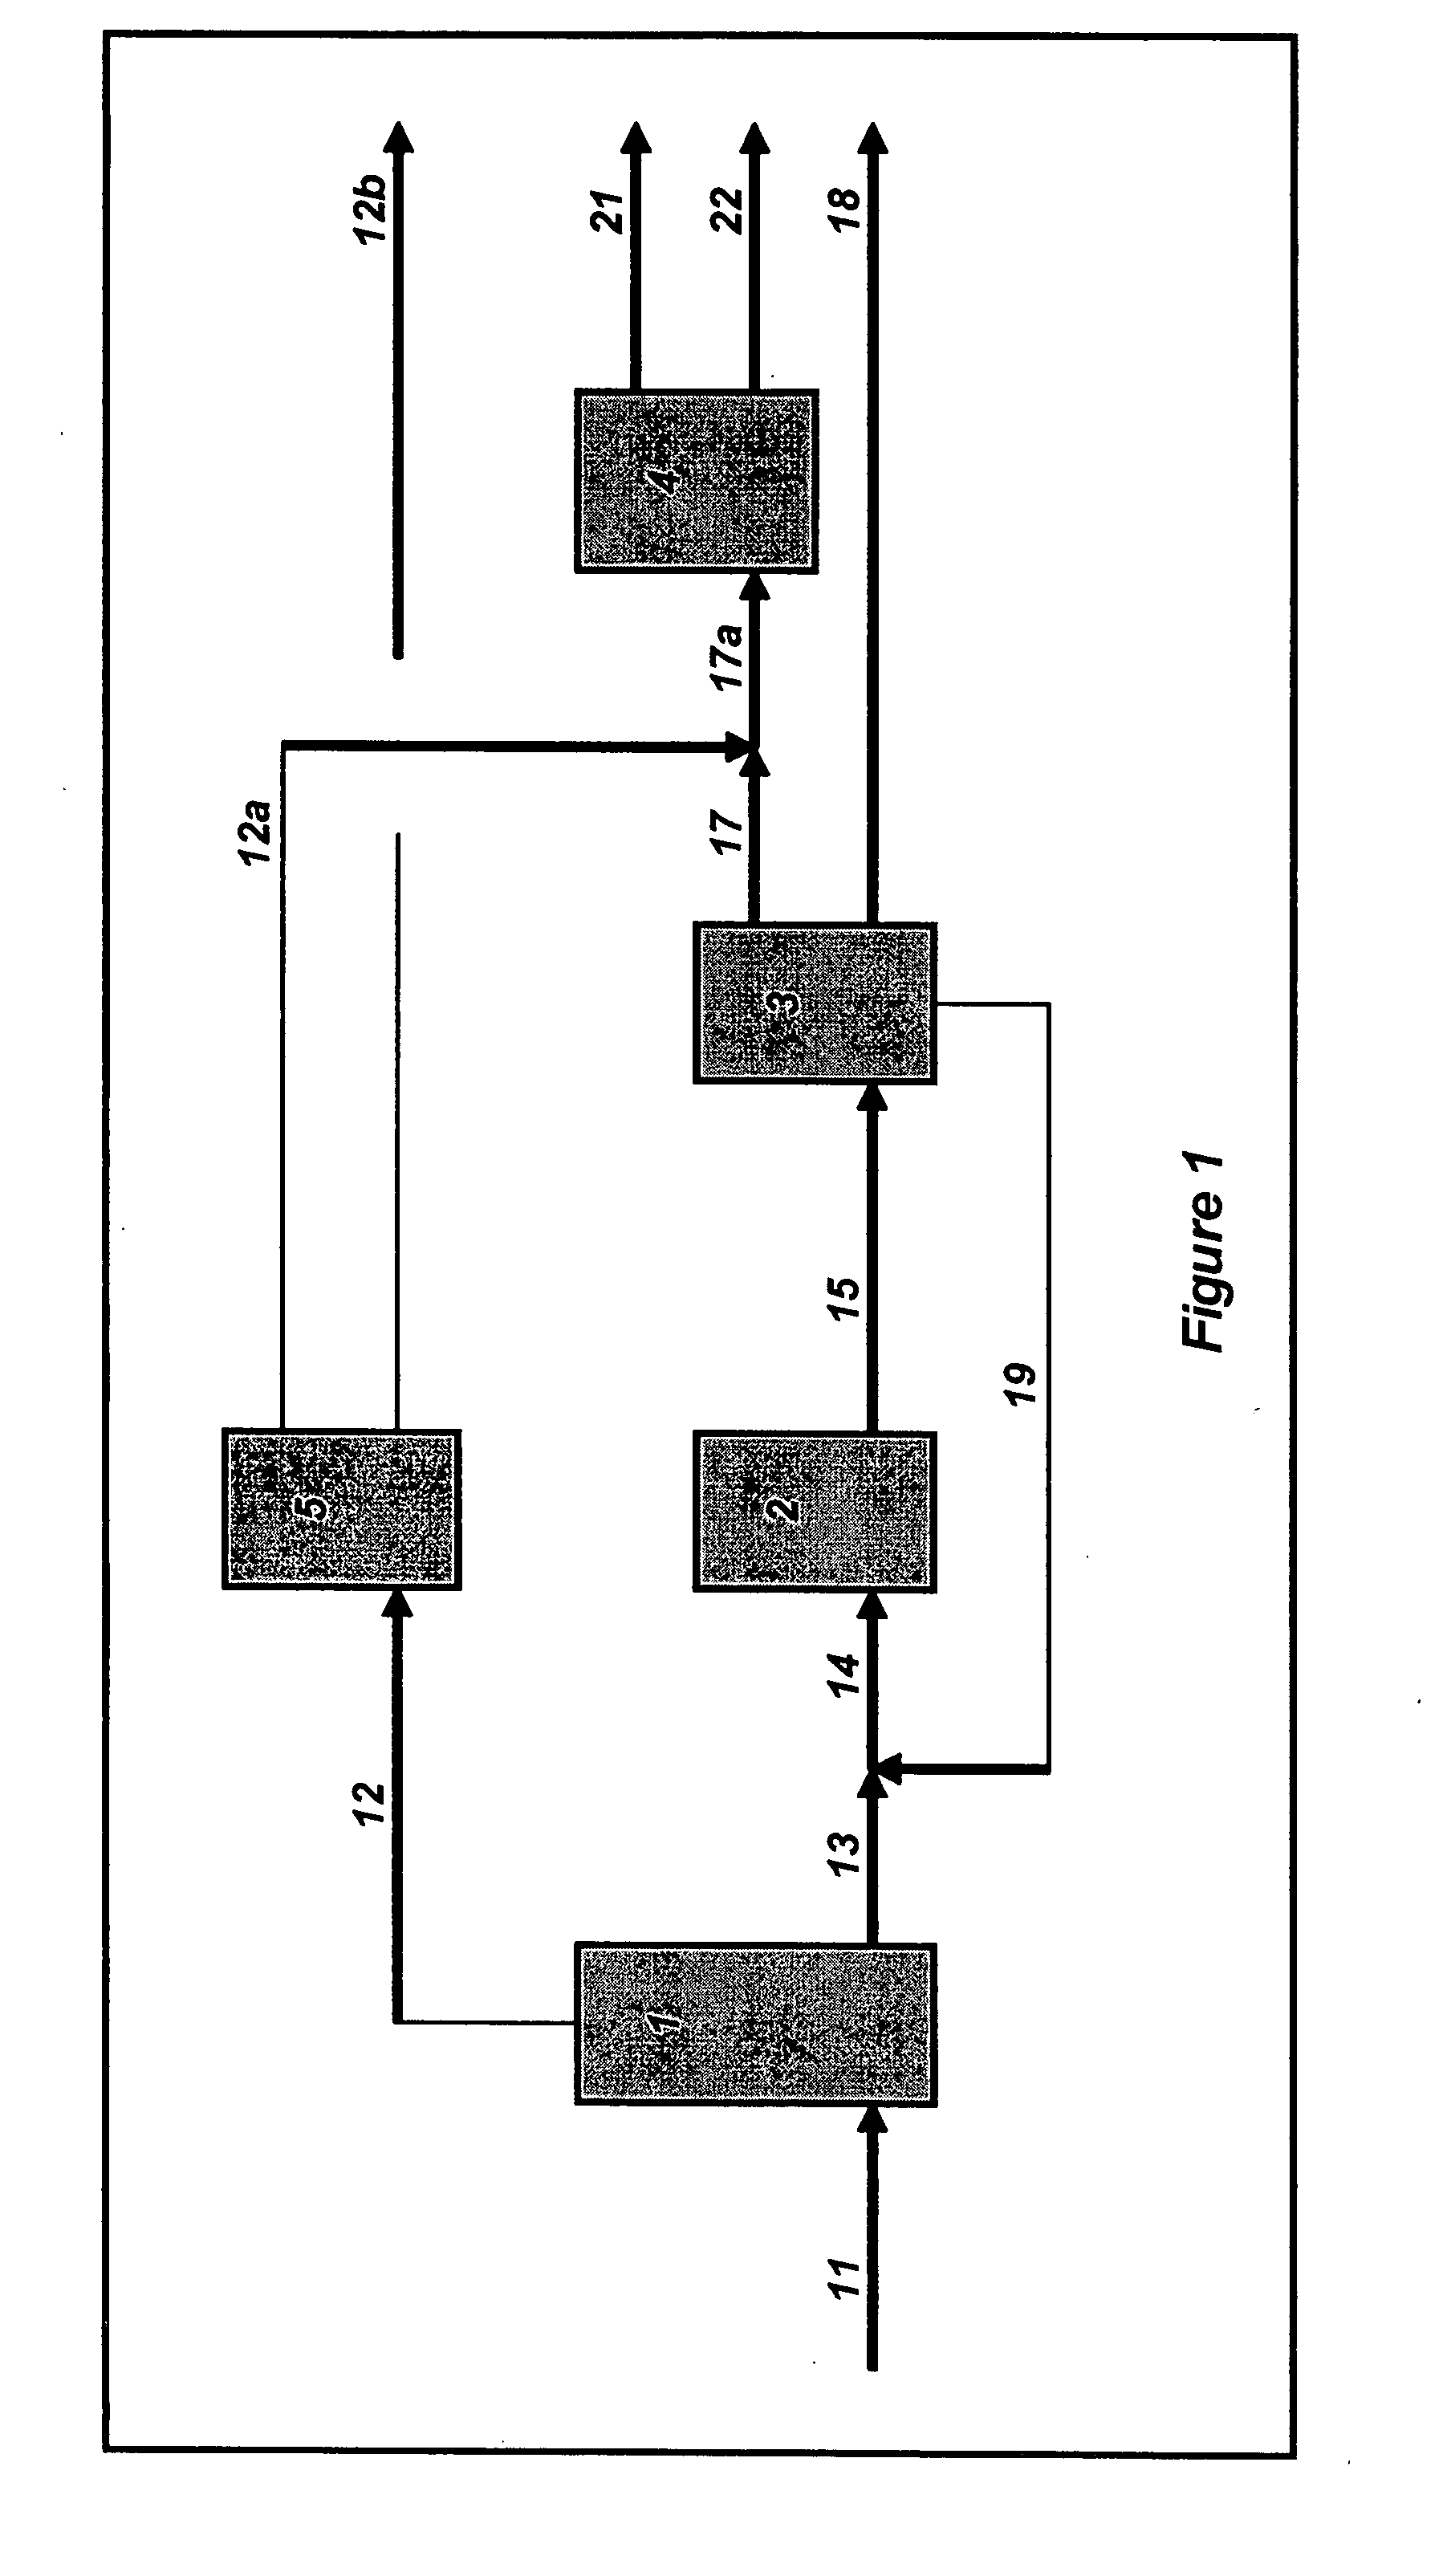 Process for the preparation of and composition of a feedstock usable for the preparation of lower olefins